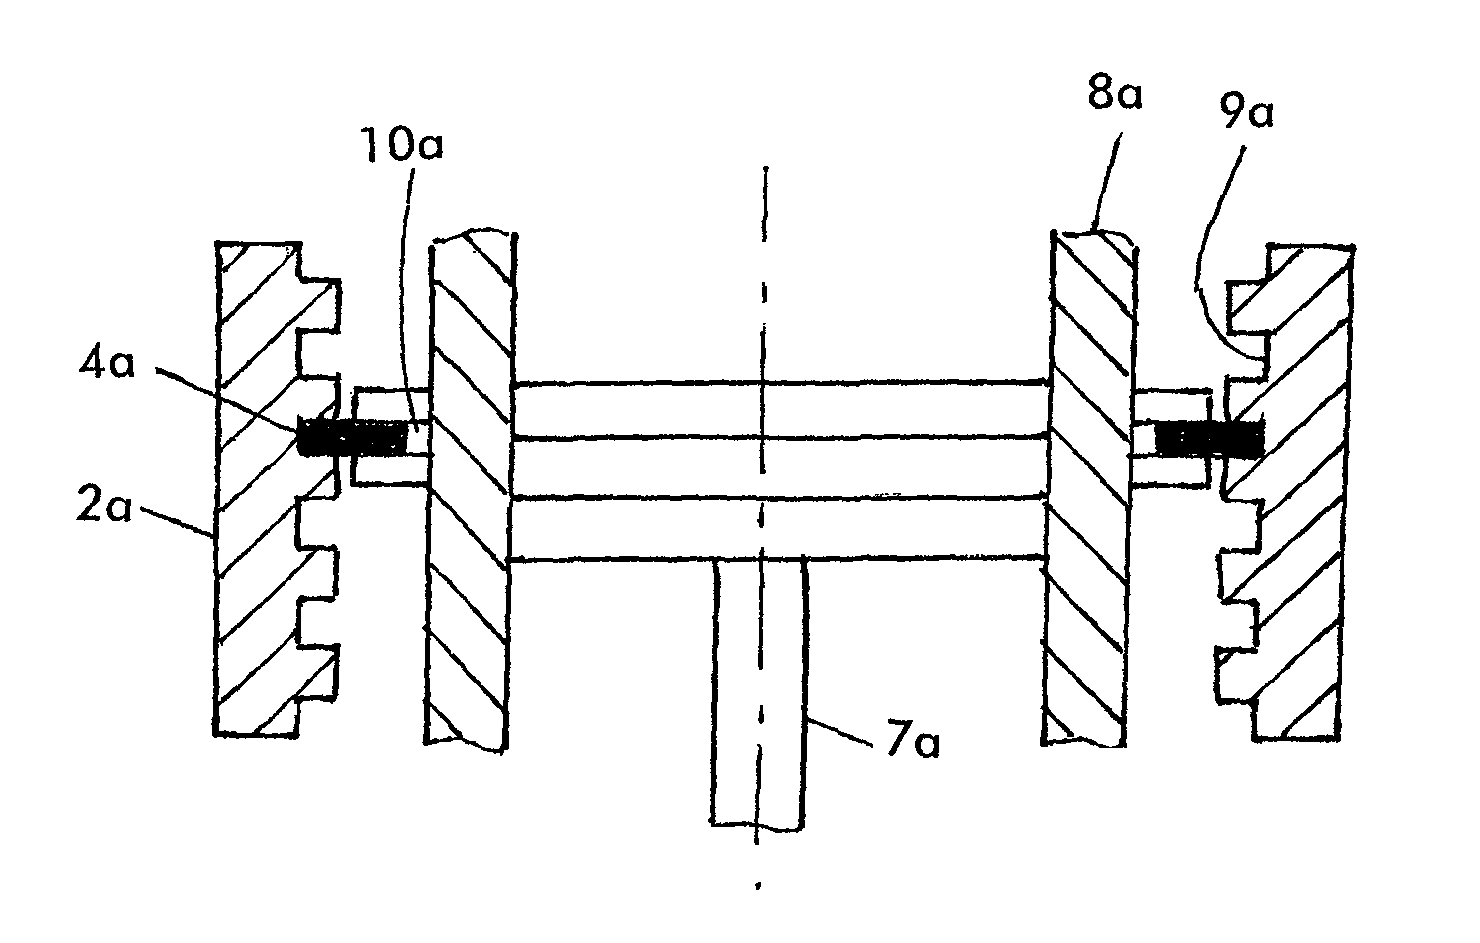 Trim actuator actuating system for a hydraulically actuatable trimmable horizontal stabilizer actuator